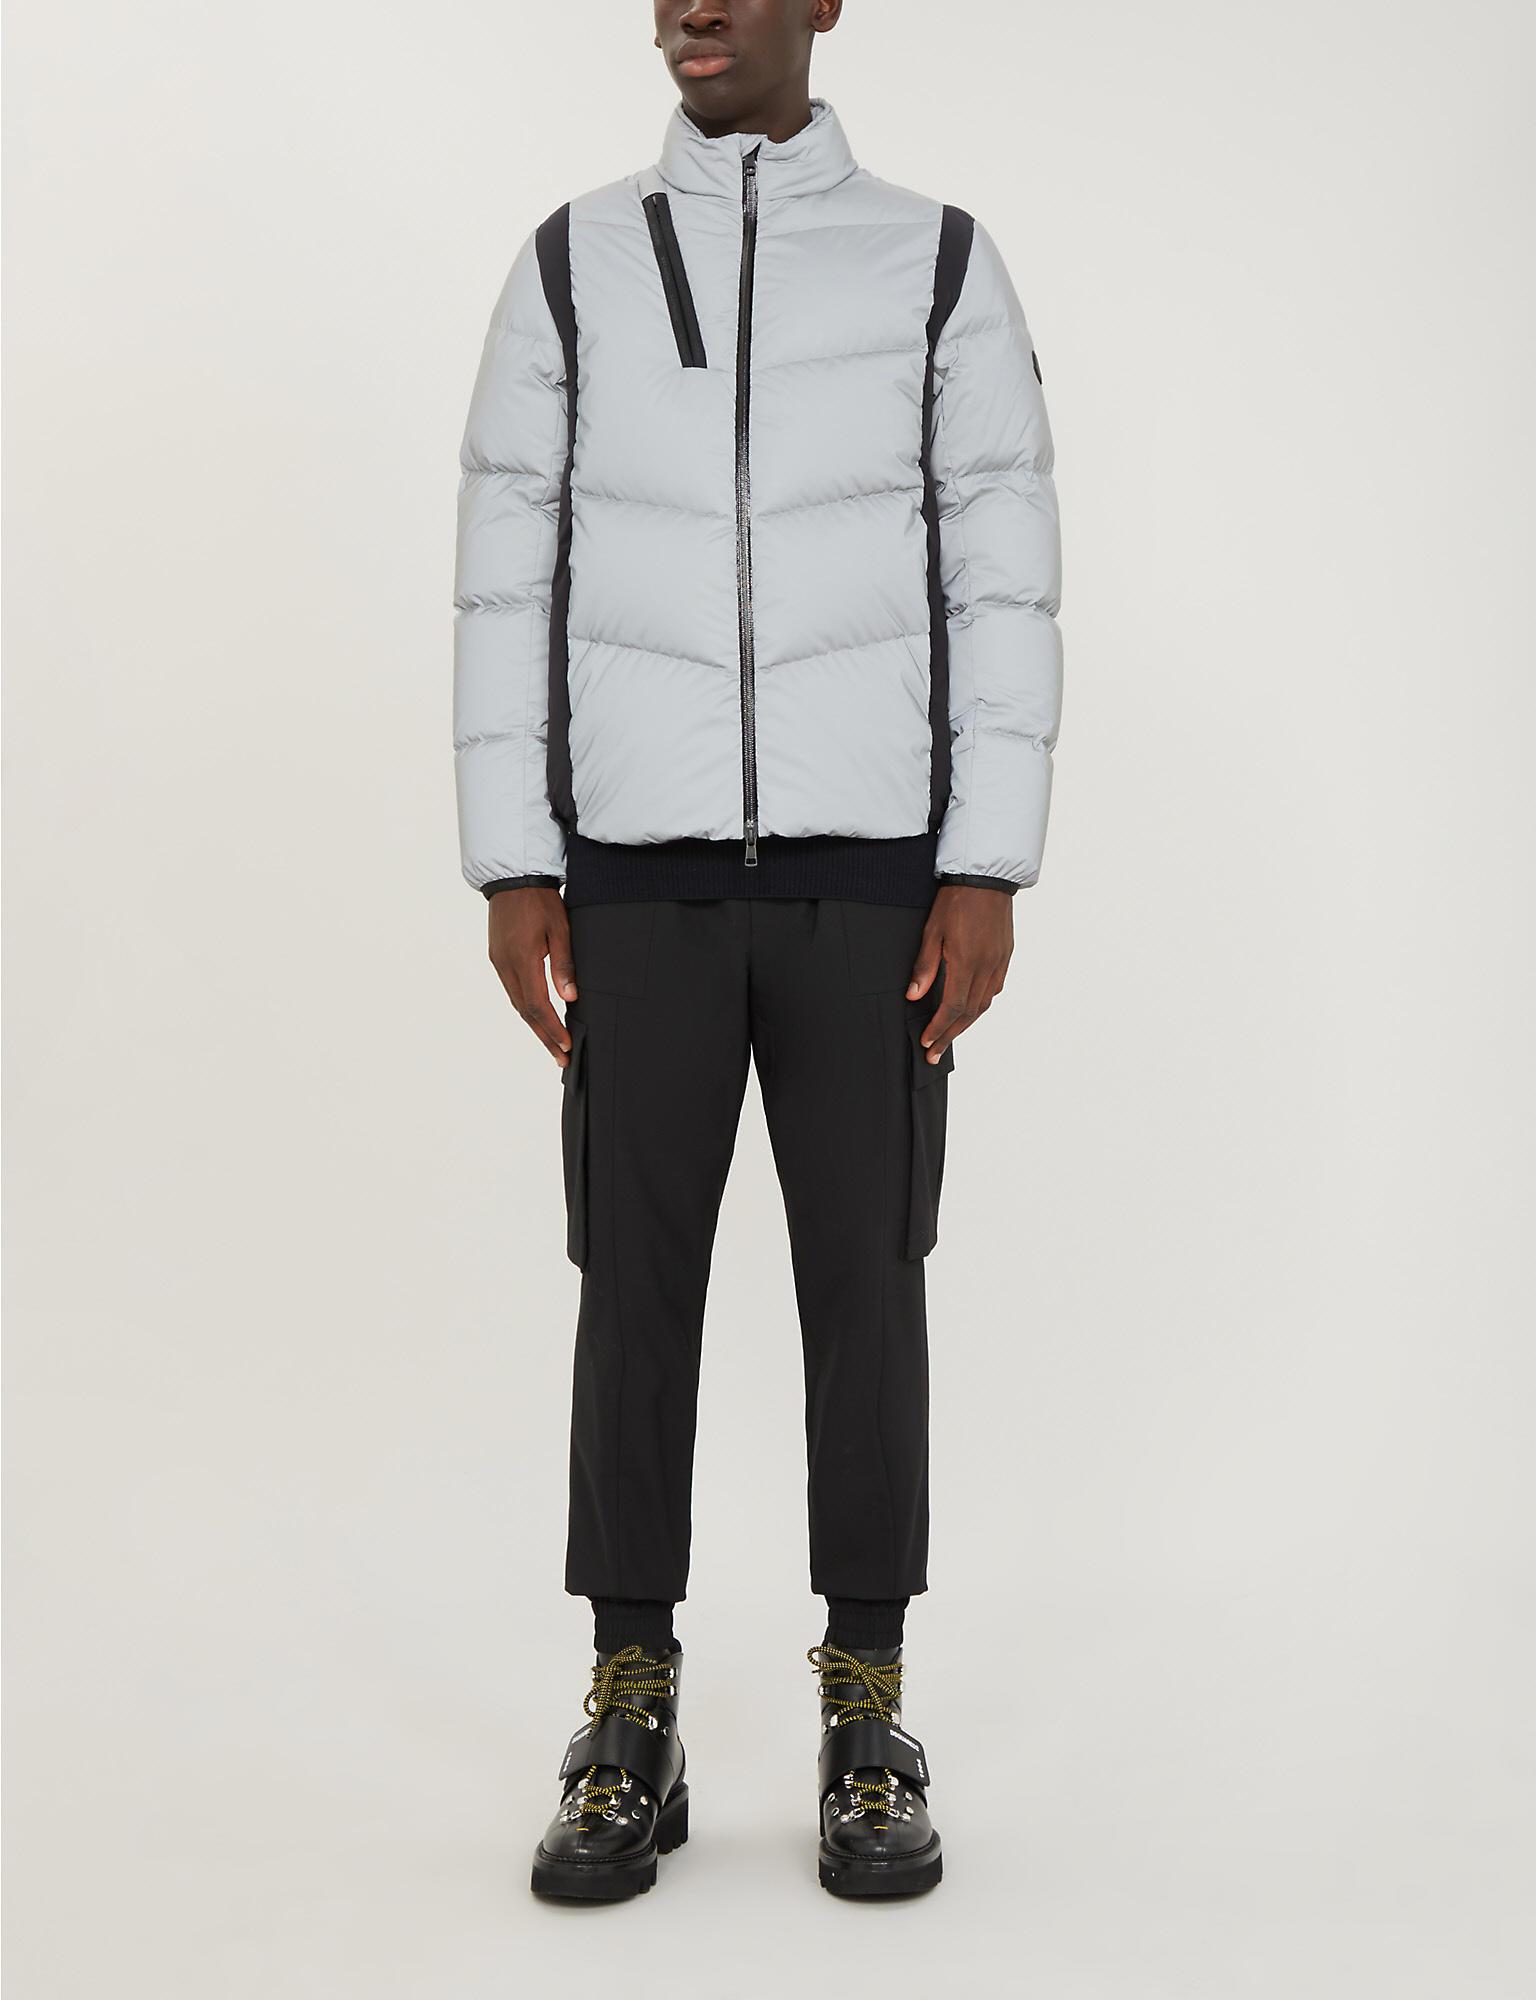 Moncler Reflective Jacket Clearance, 57% OFF | www.ilpungolo.org